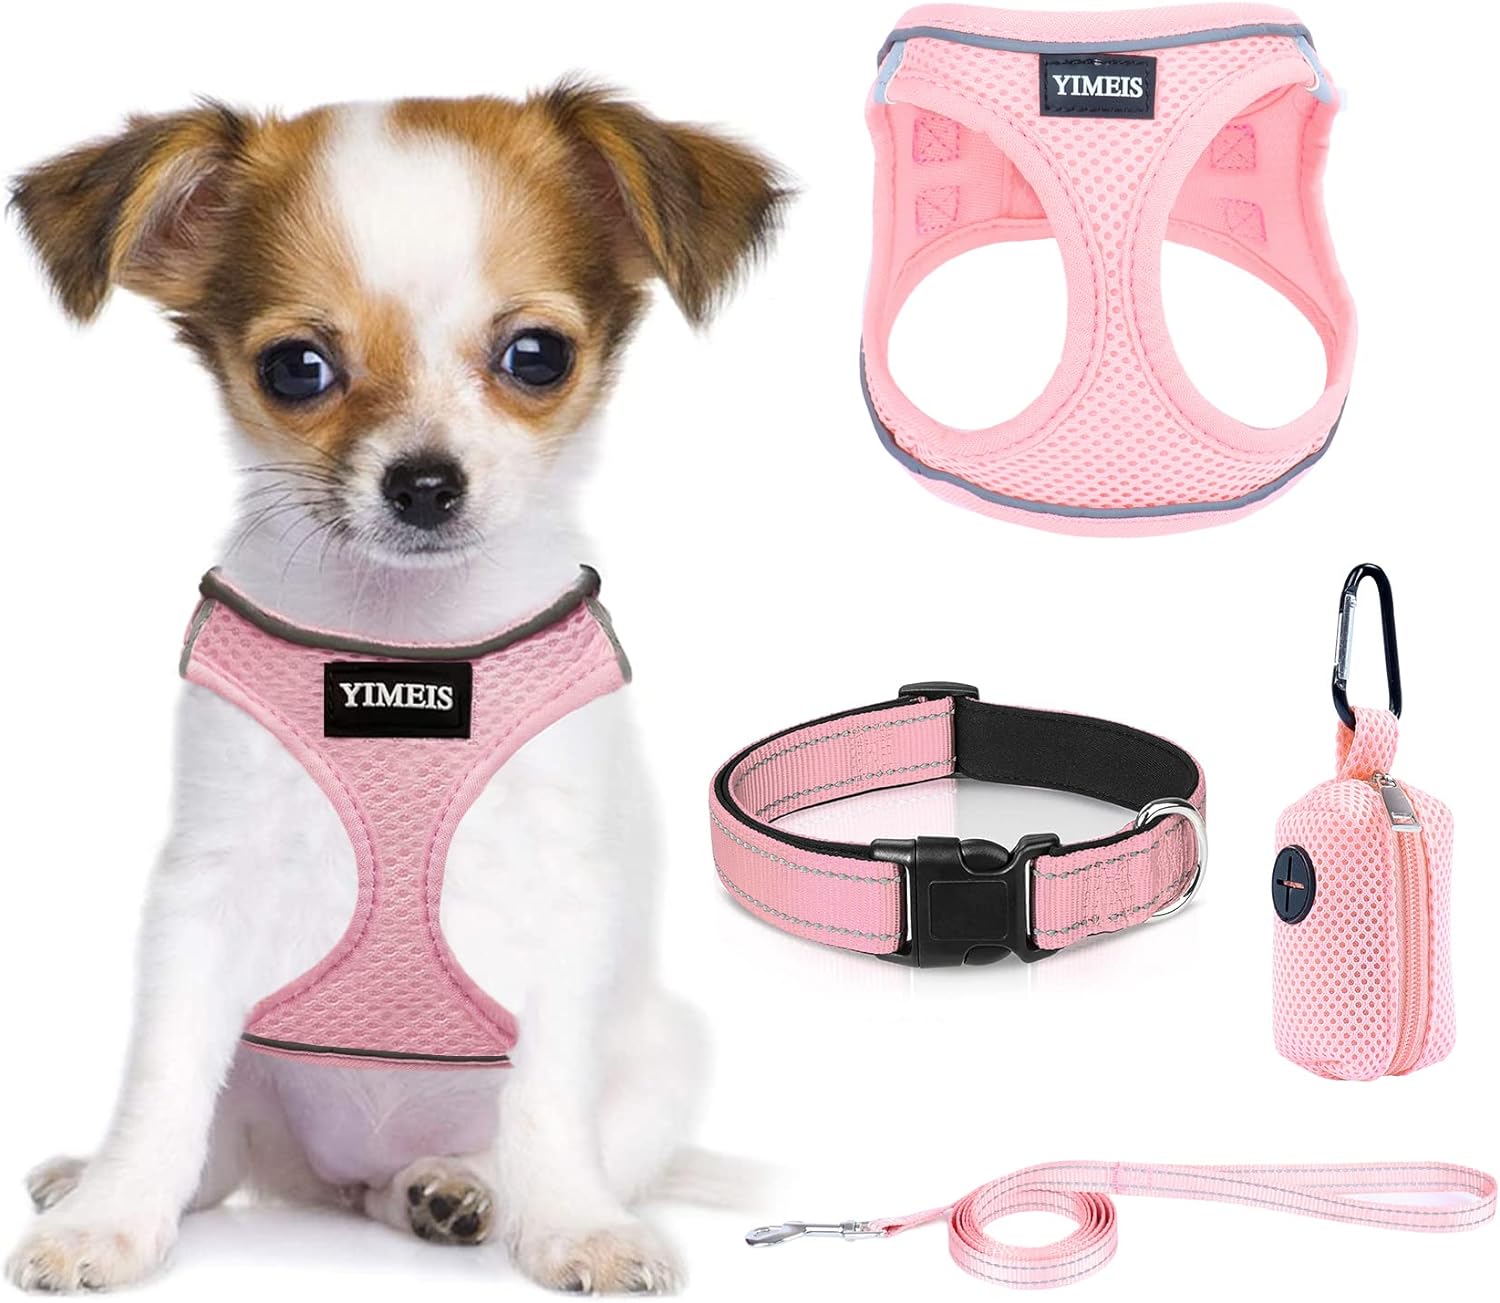 YIMEIS Dog Harness and Leash Set, No Pull Soft Mesh Pet Harness, Reflective Adjustable Puppy Vest for Small Medium Large Dogs, Cats (Pink-Update, Small (Pack of 1)